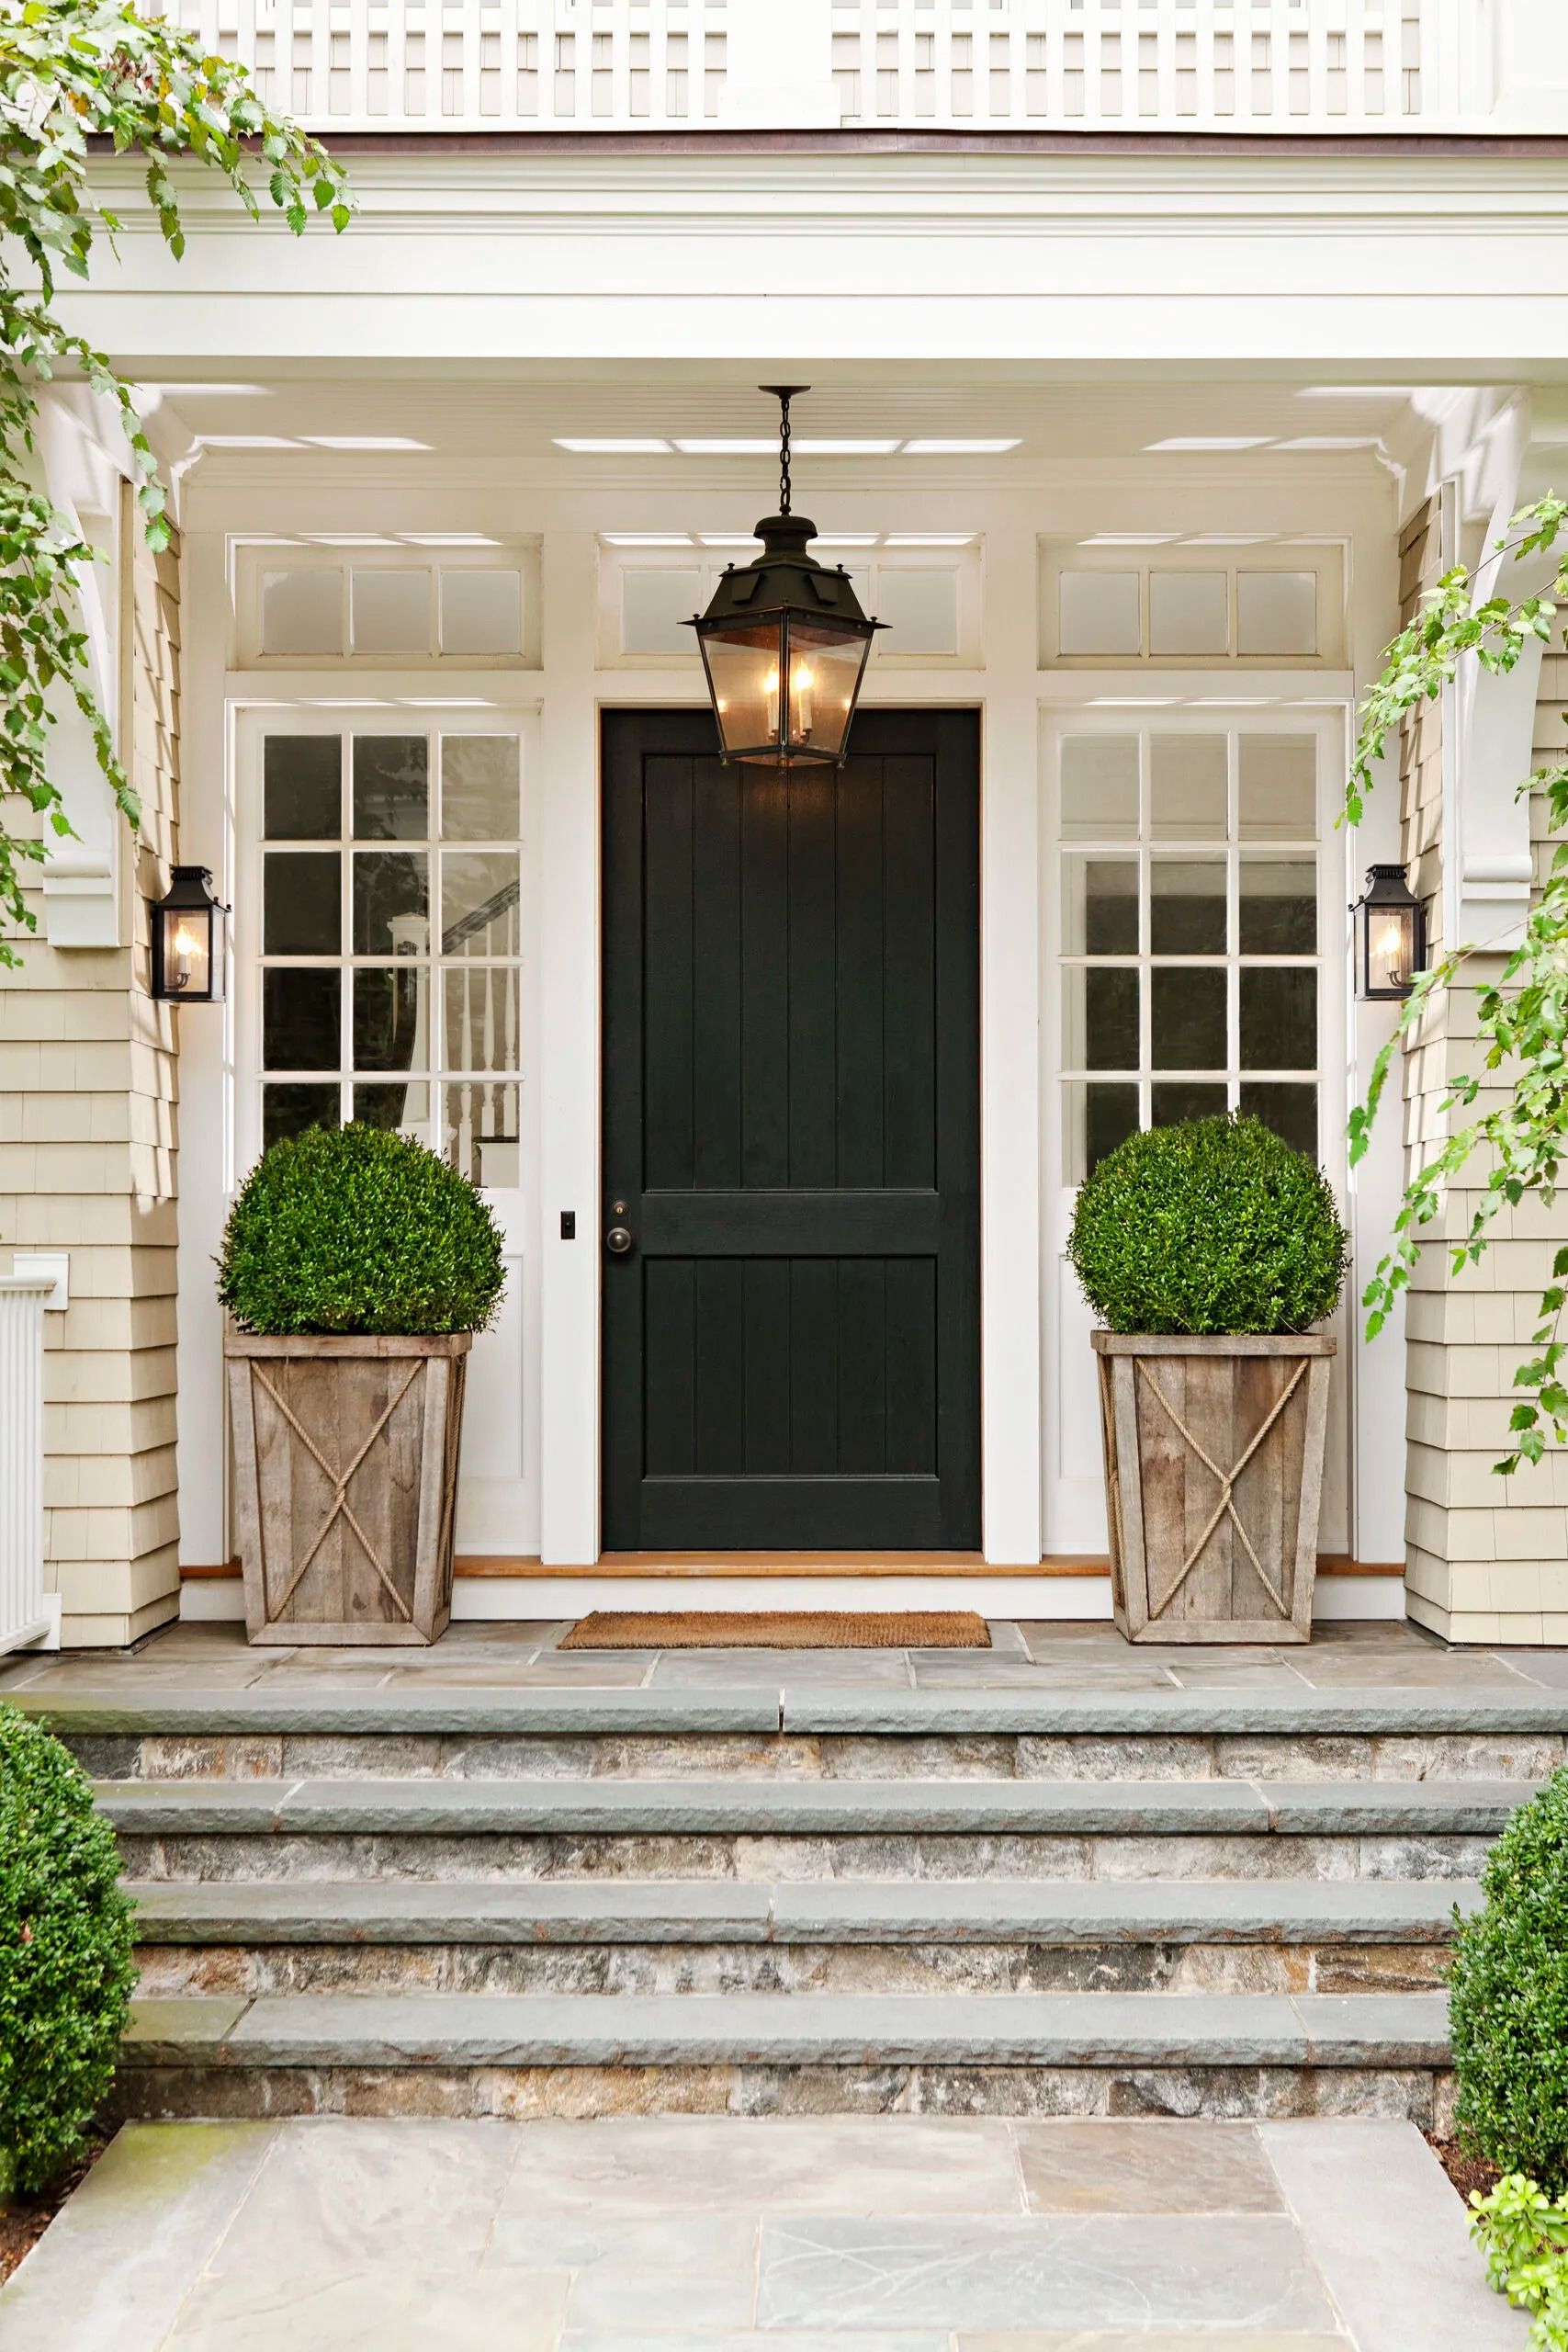 Choosing Porch Lighting Illuminate Your Outdoor Space with the Perfect Porch Lighting Option